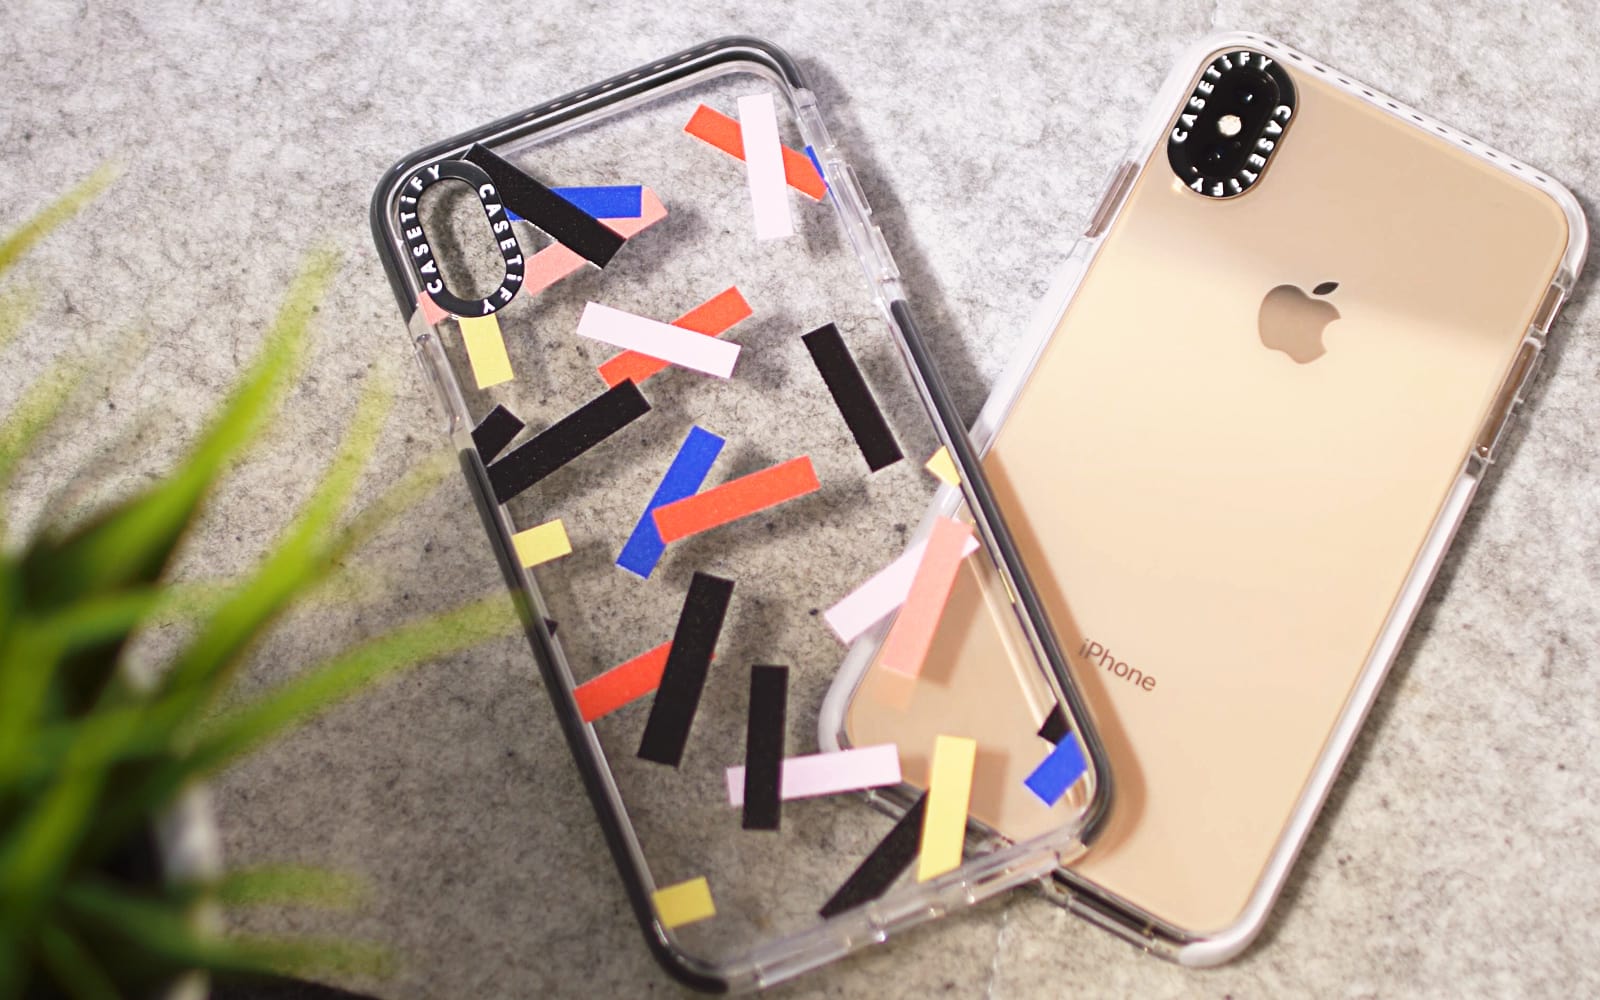 The Casetify Impact cases come in clear models as well as much more colorful options like Confetti.